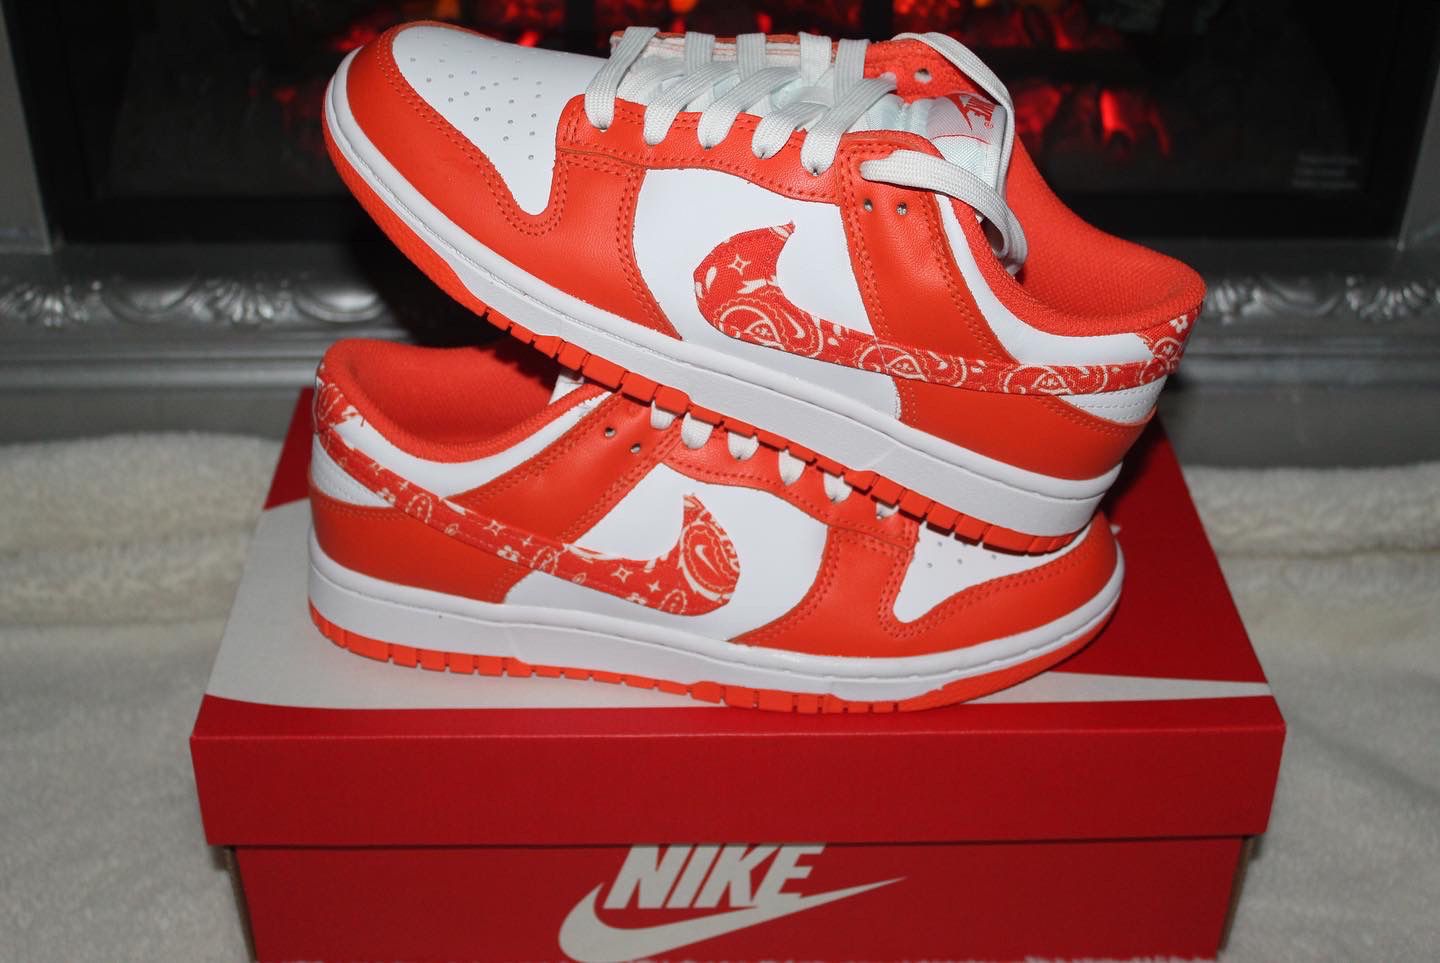 Dunk Low Orange paisley for in The NY - OfferUp